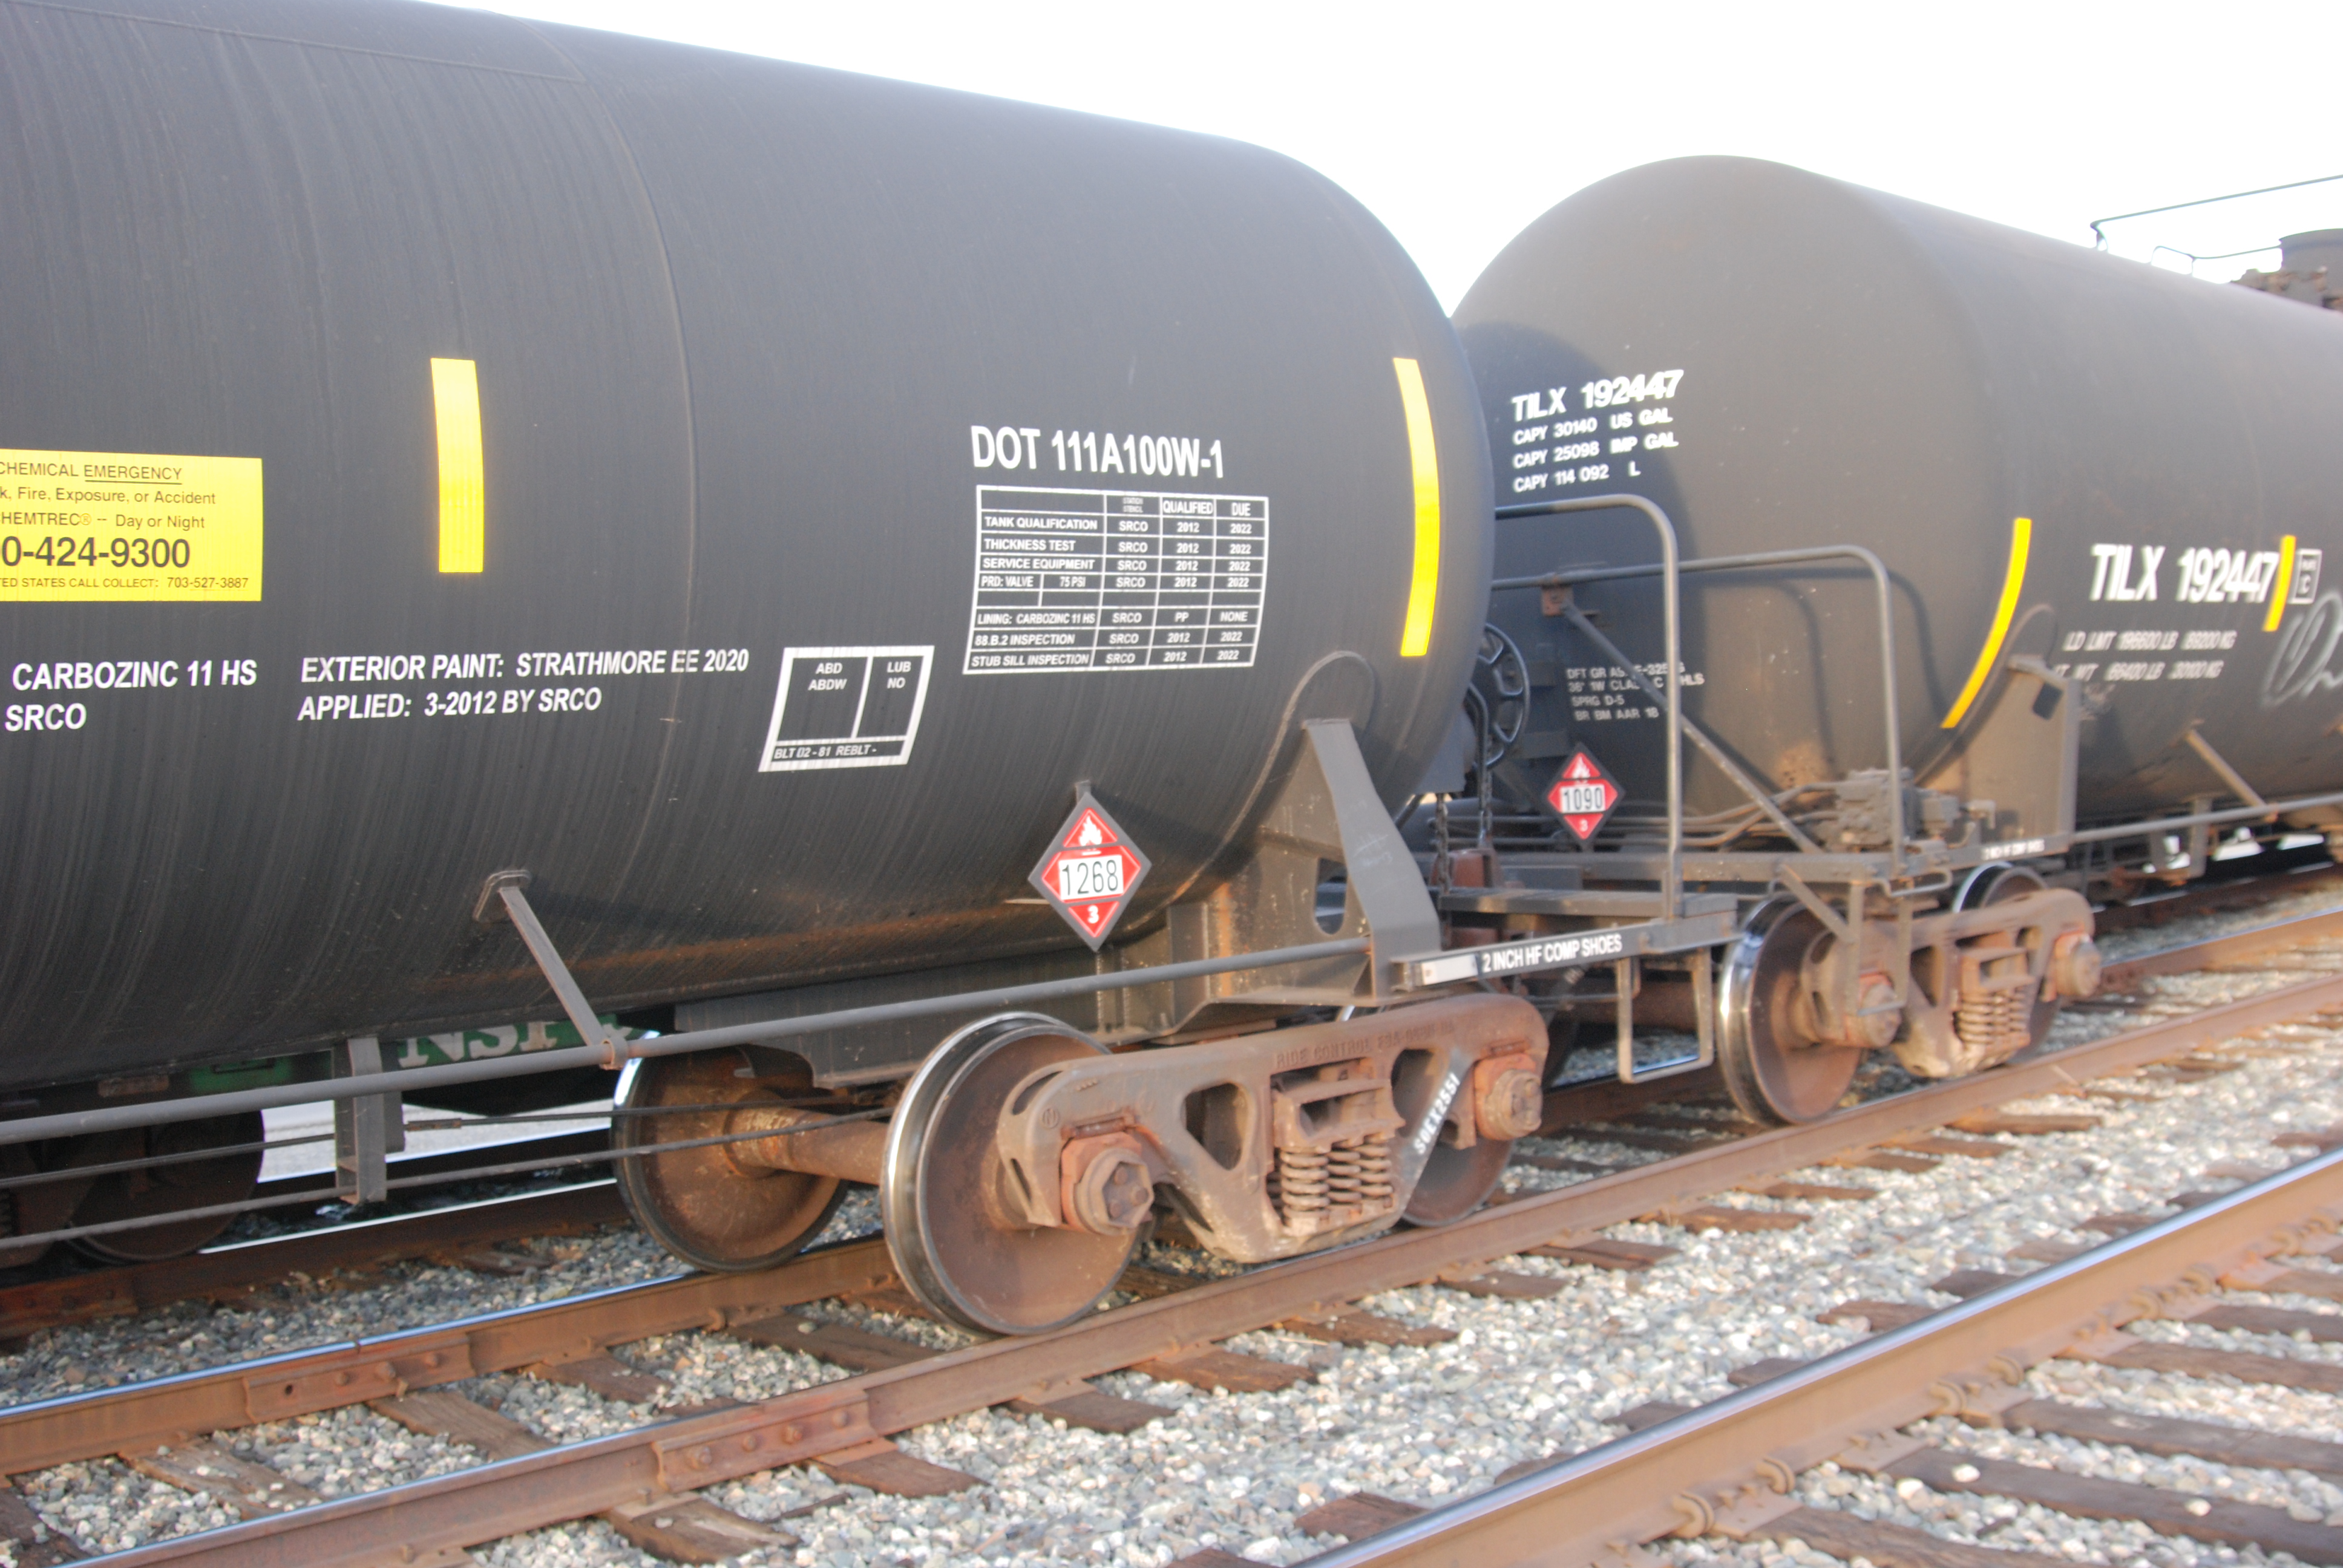 New Tests Ordered on Crude by Rail